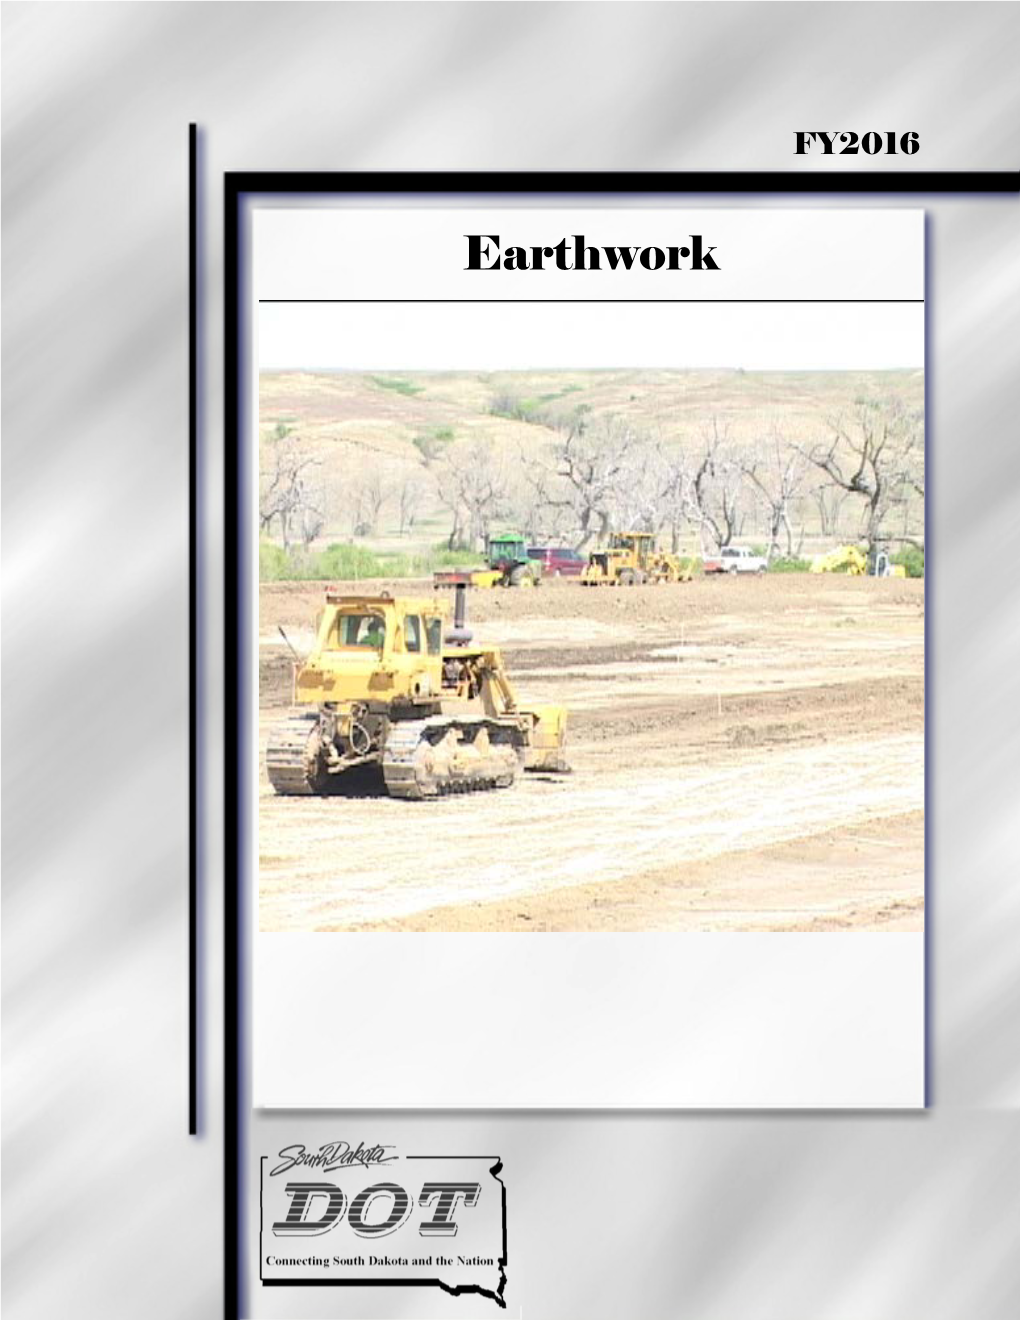 Earthwork Manual • Erosion Control Manual This Book Should Be Kept by the Pipe Installation Inspector As a Reference Guide During the Performance of His Duties